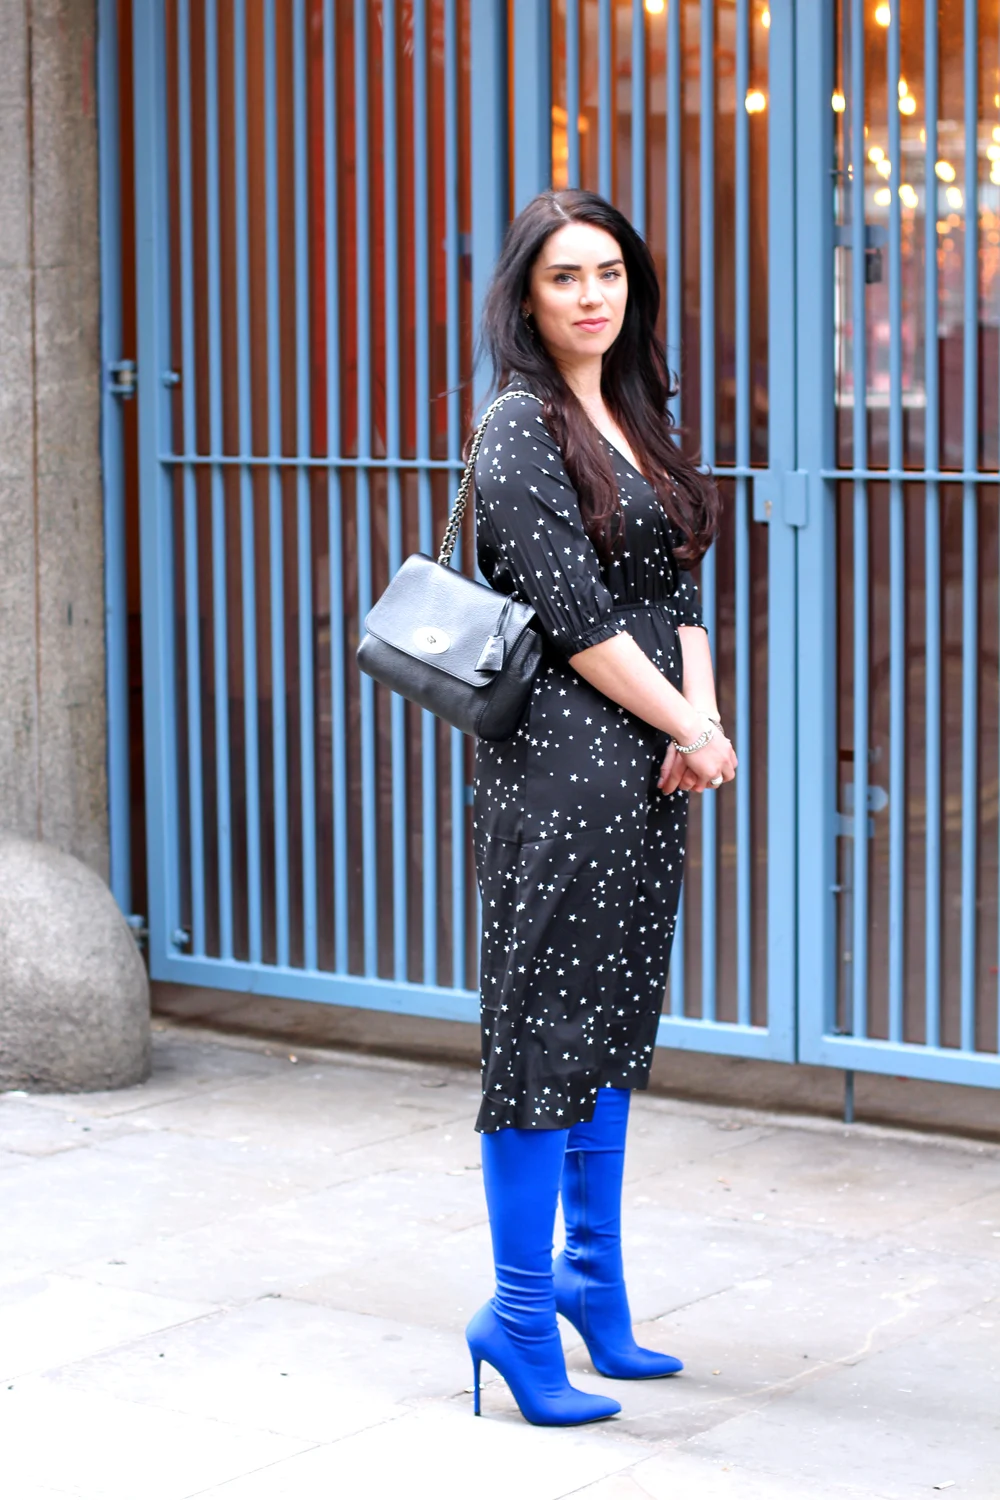 Emma Louise Layla in Boohoo star dress and blue thigh high boots - London style blogger